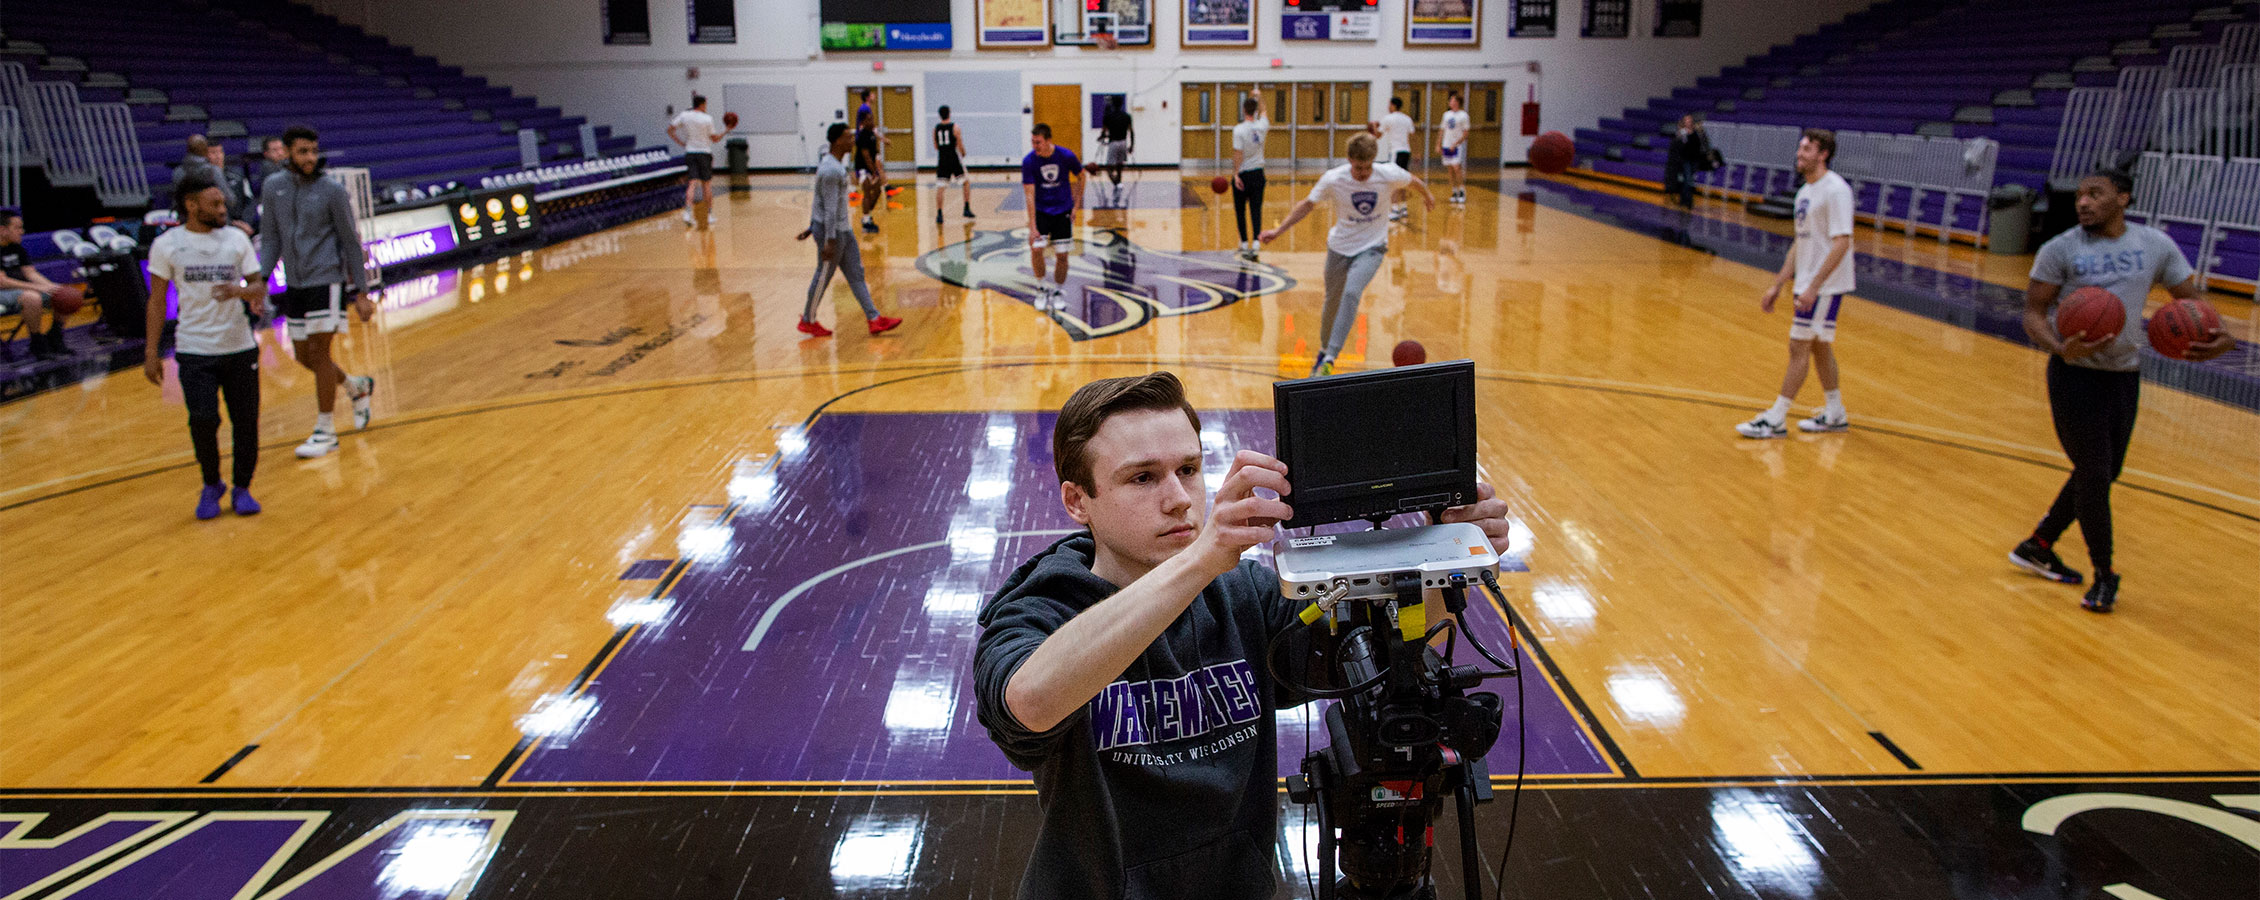  Student sets up camera to broadcast a basketball game at UW-Whitewater.